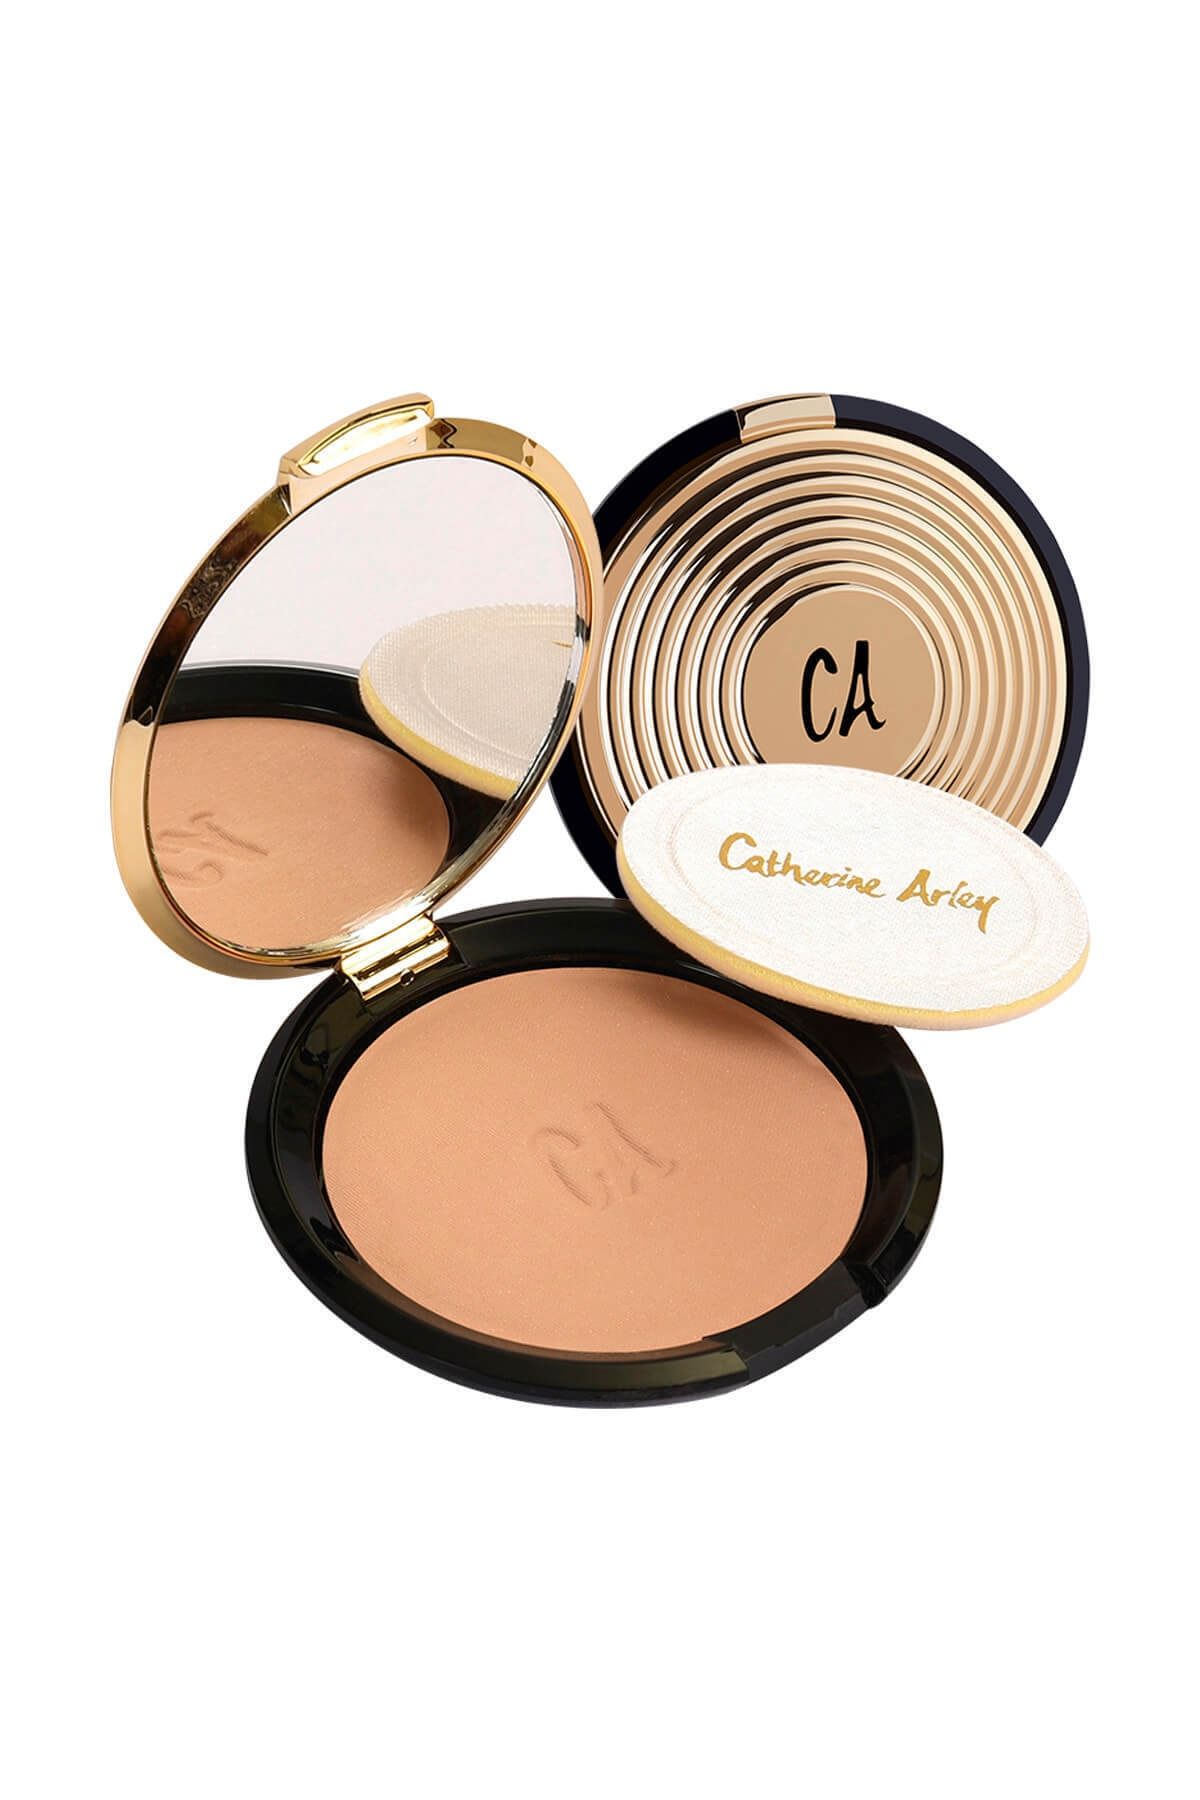 Catherine Arley Gold Compact Powder (Gold Pudra) - 104 -